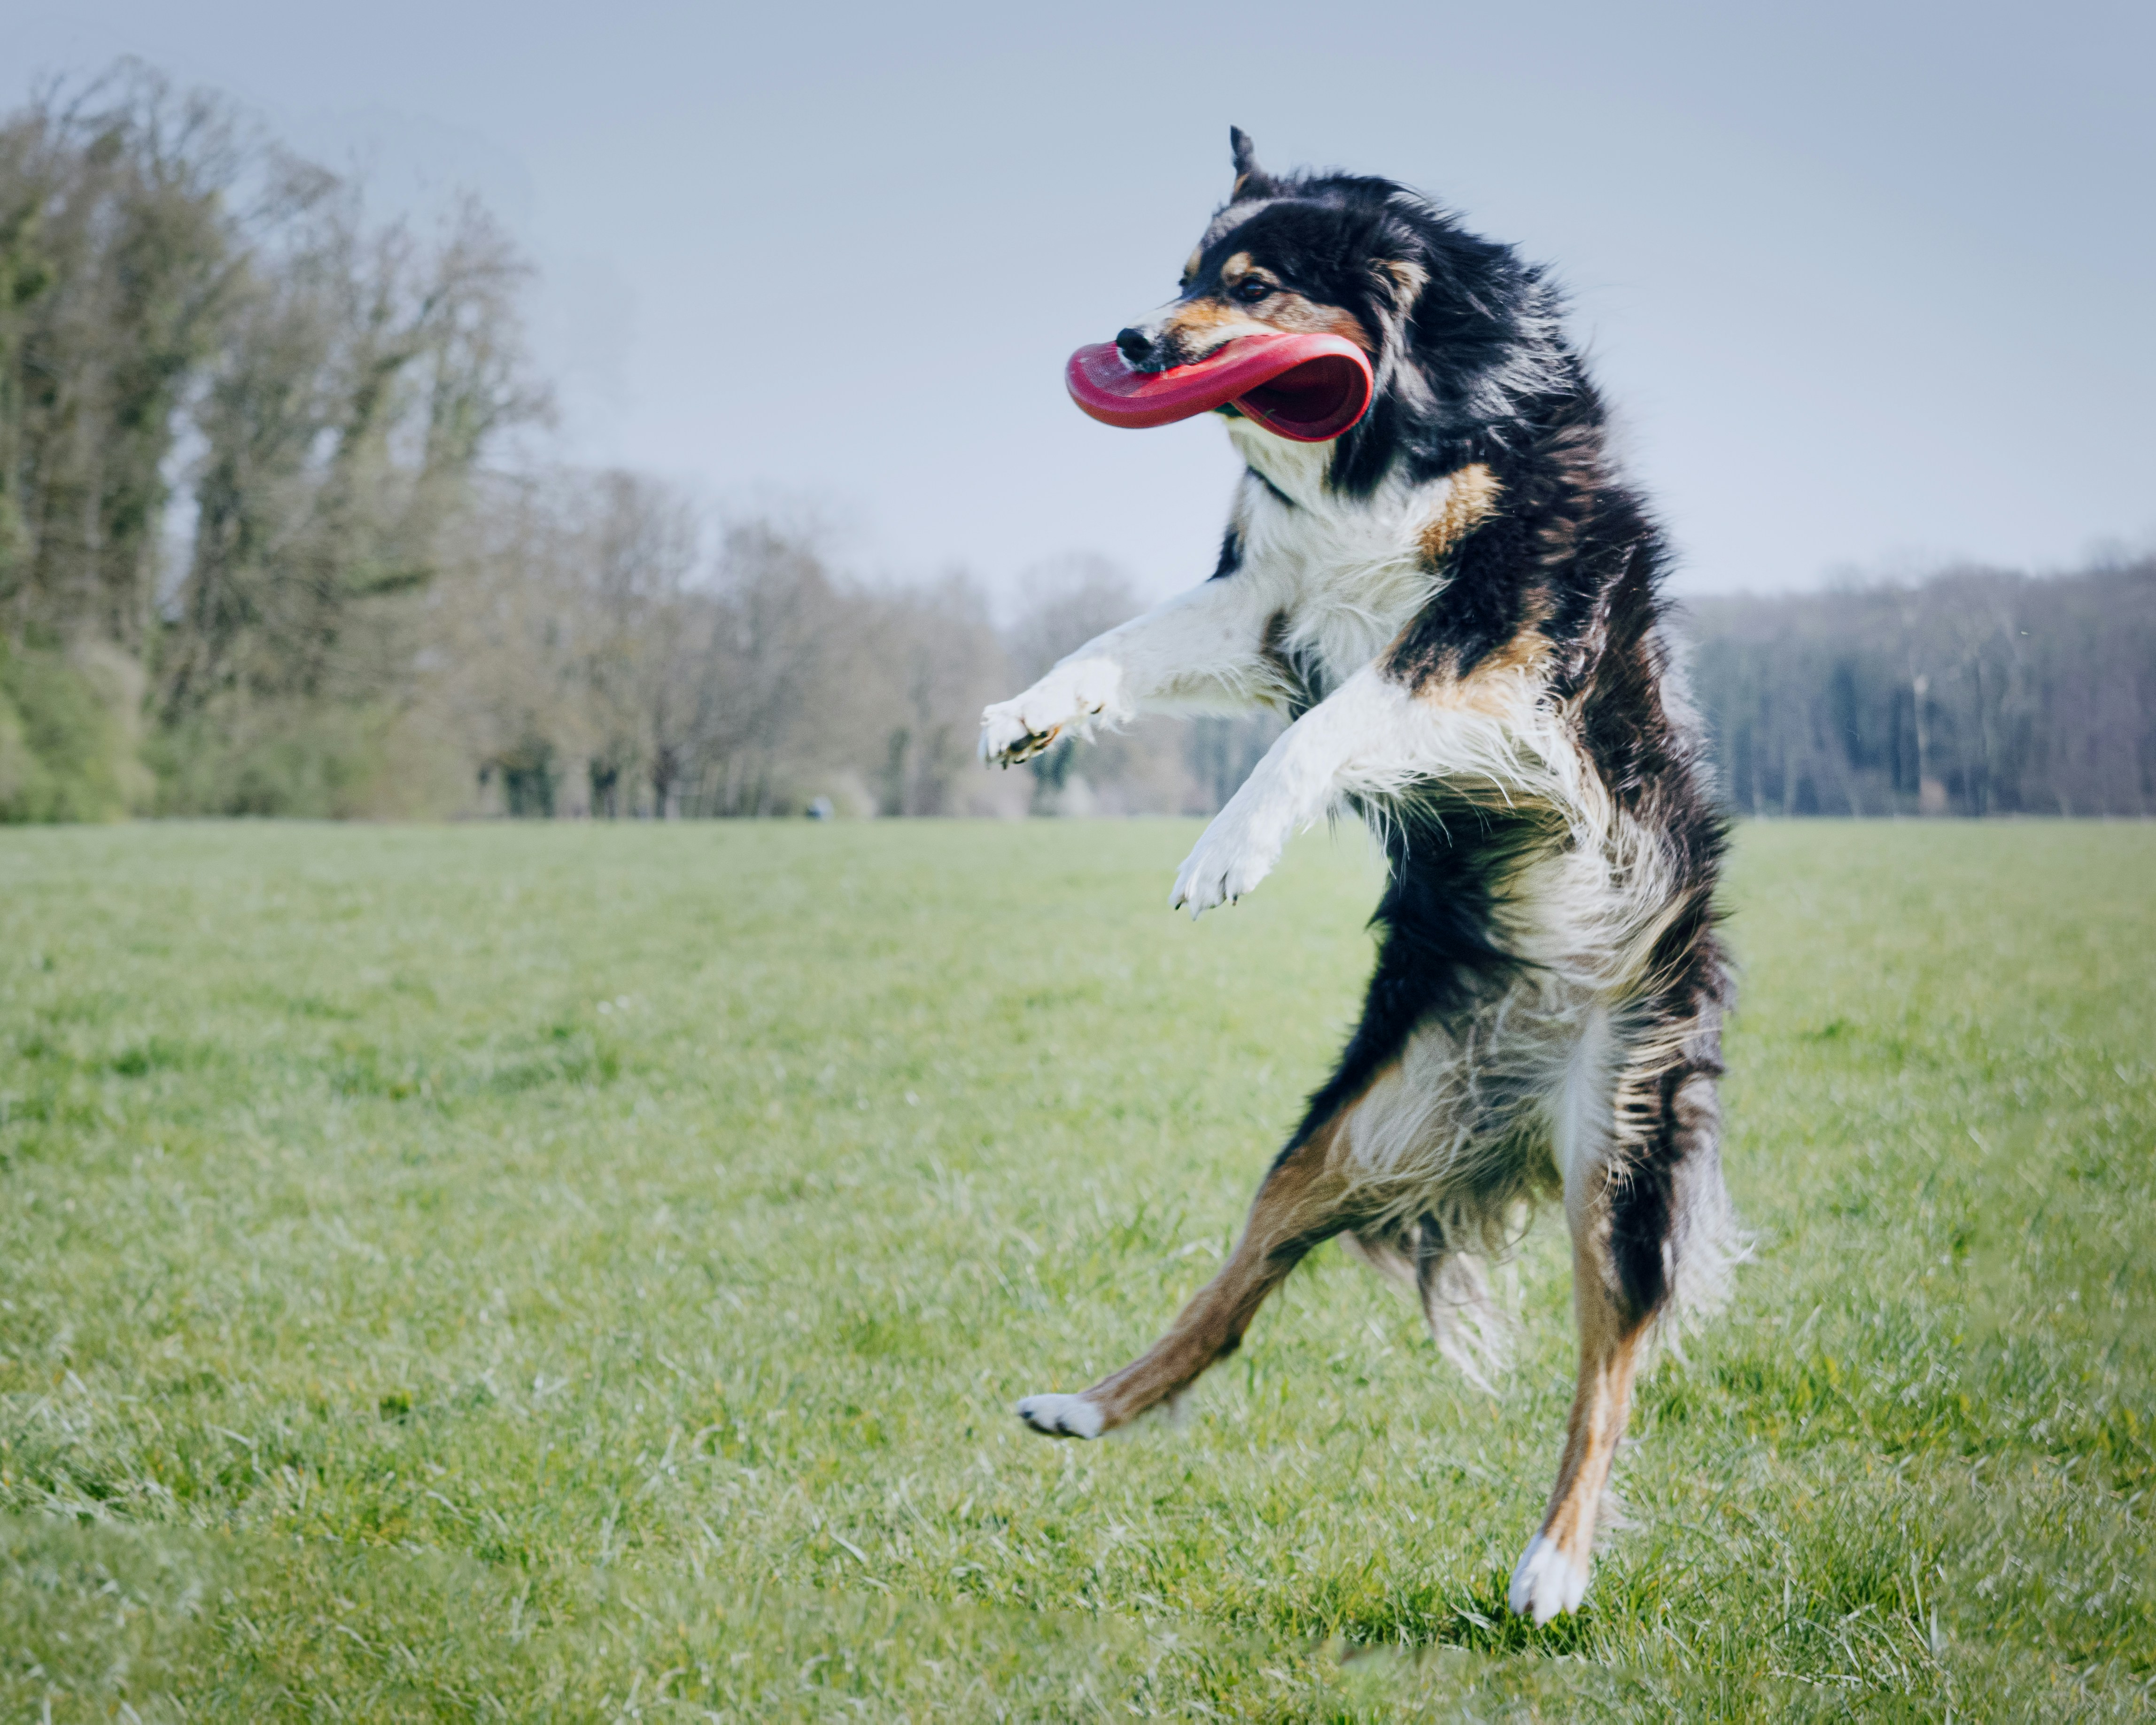 Border Collie fetching frisbee